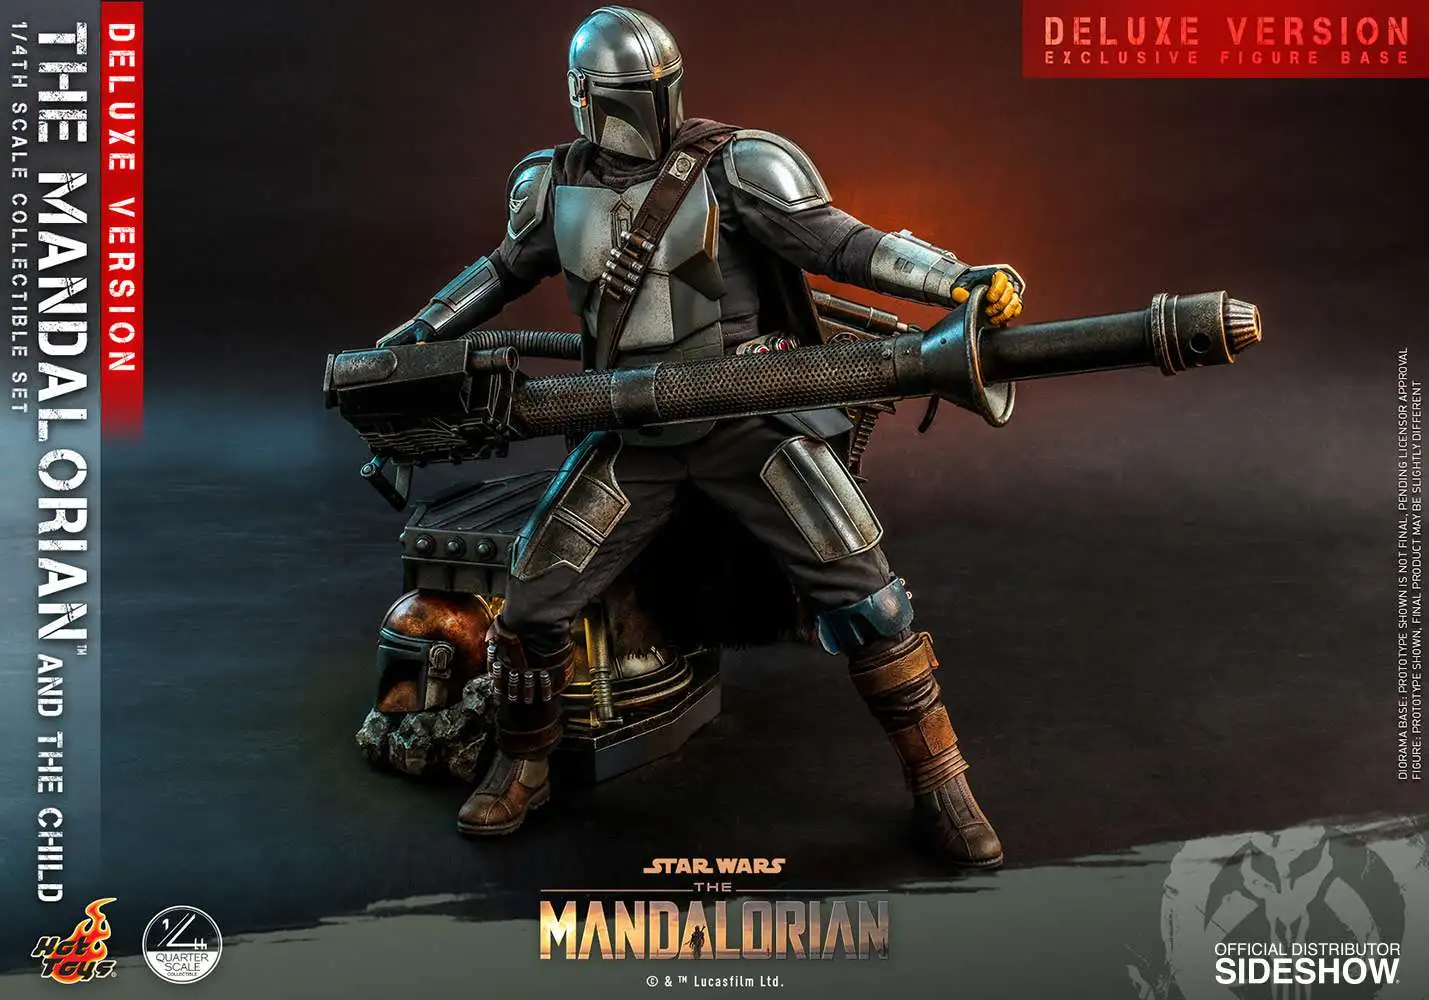 STAR WARS - The Mandalorian & The Child - Figurines Deluxe 46cm